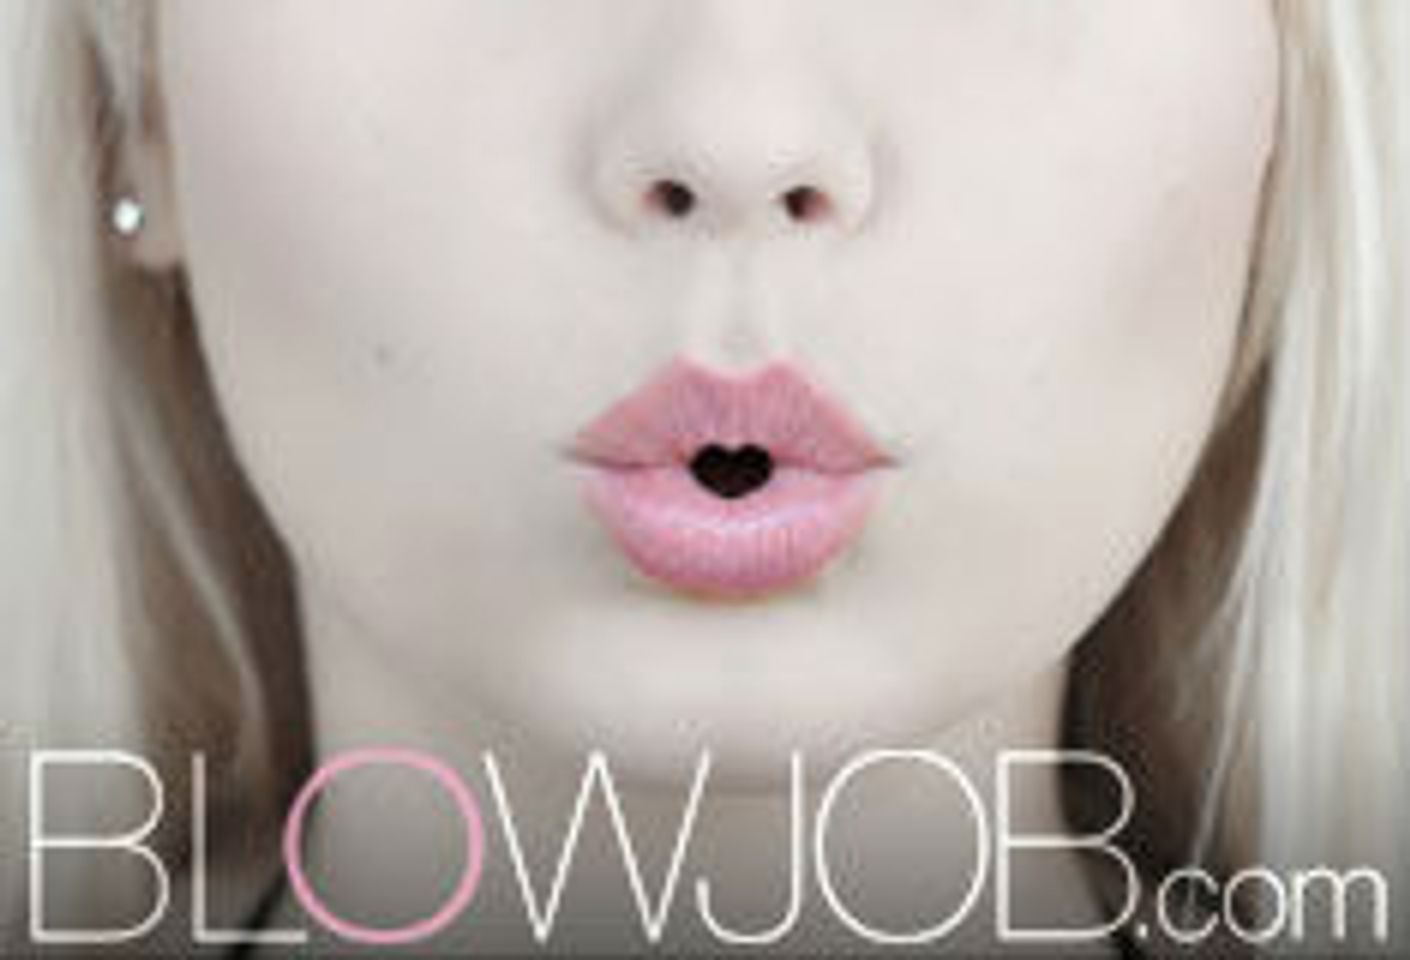 Really Useful Cash Launches Blowjob.com in Porn Partnership